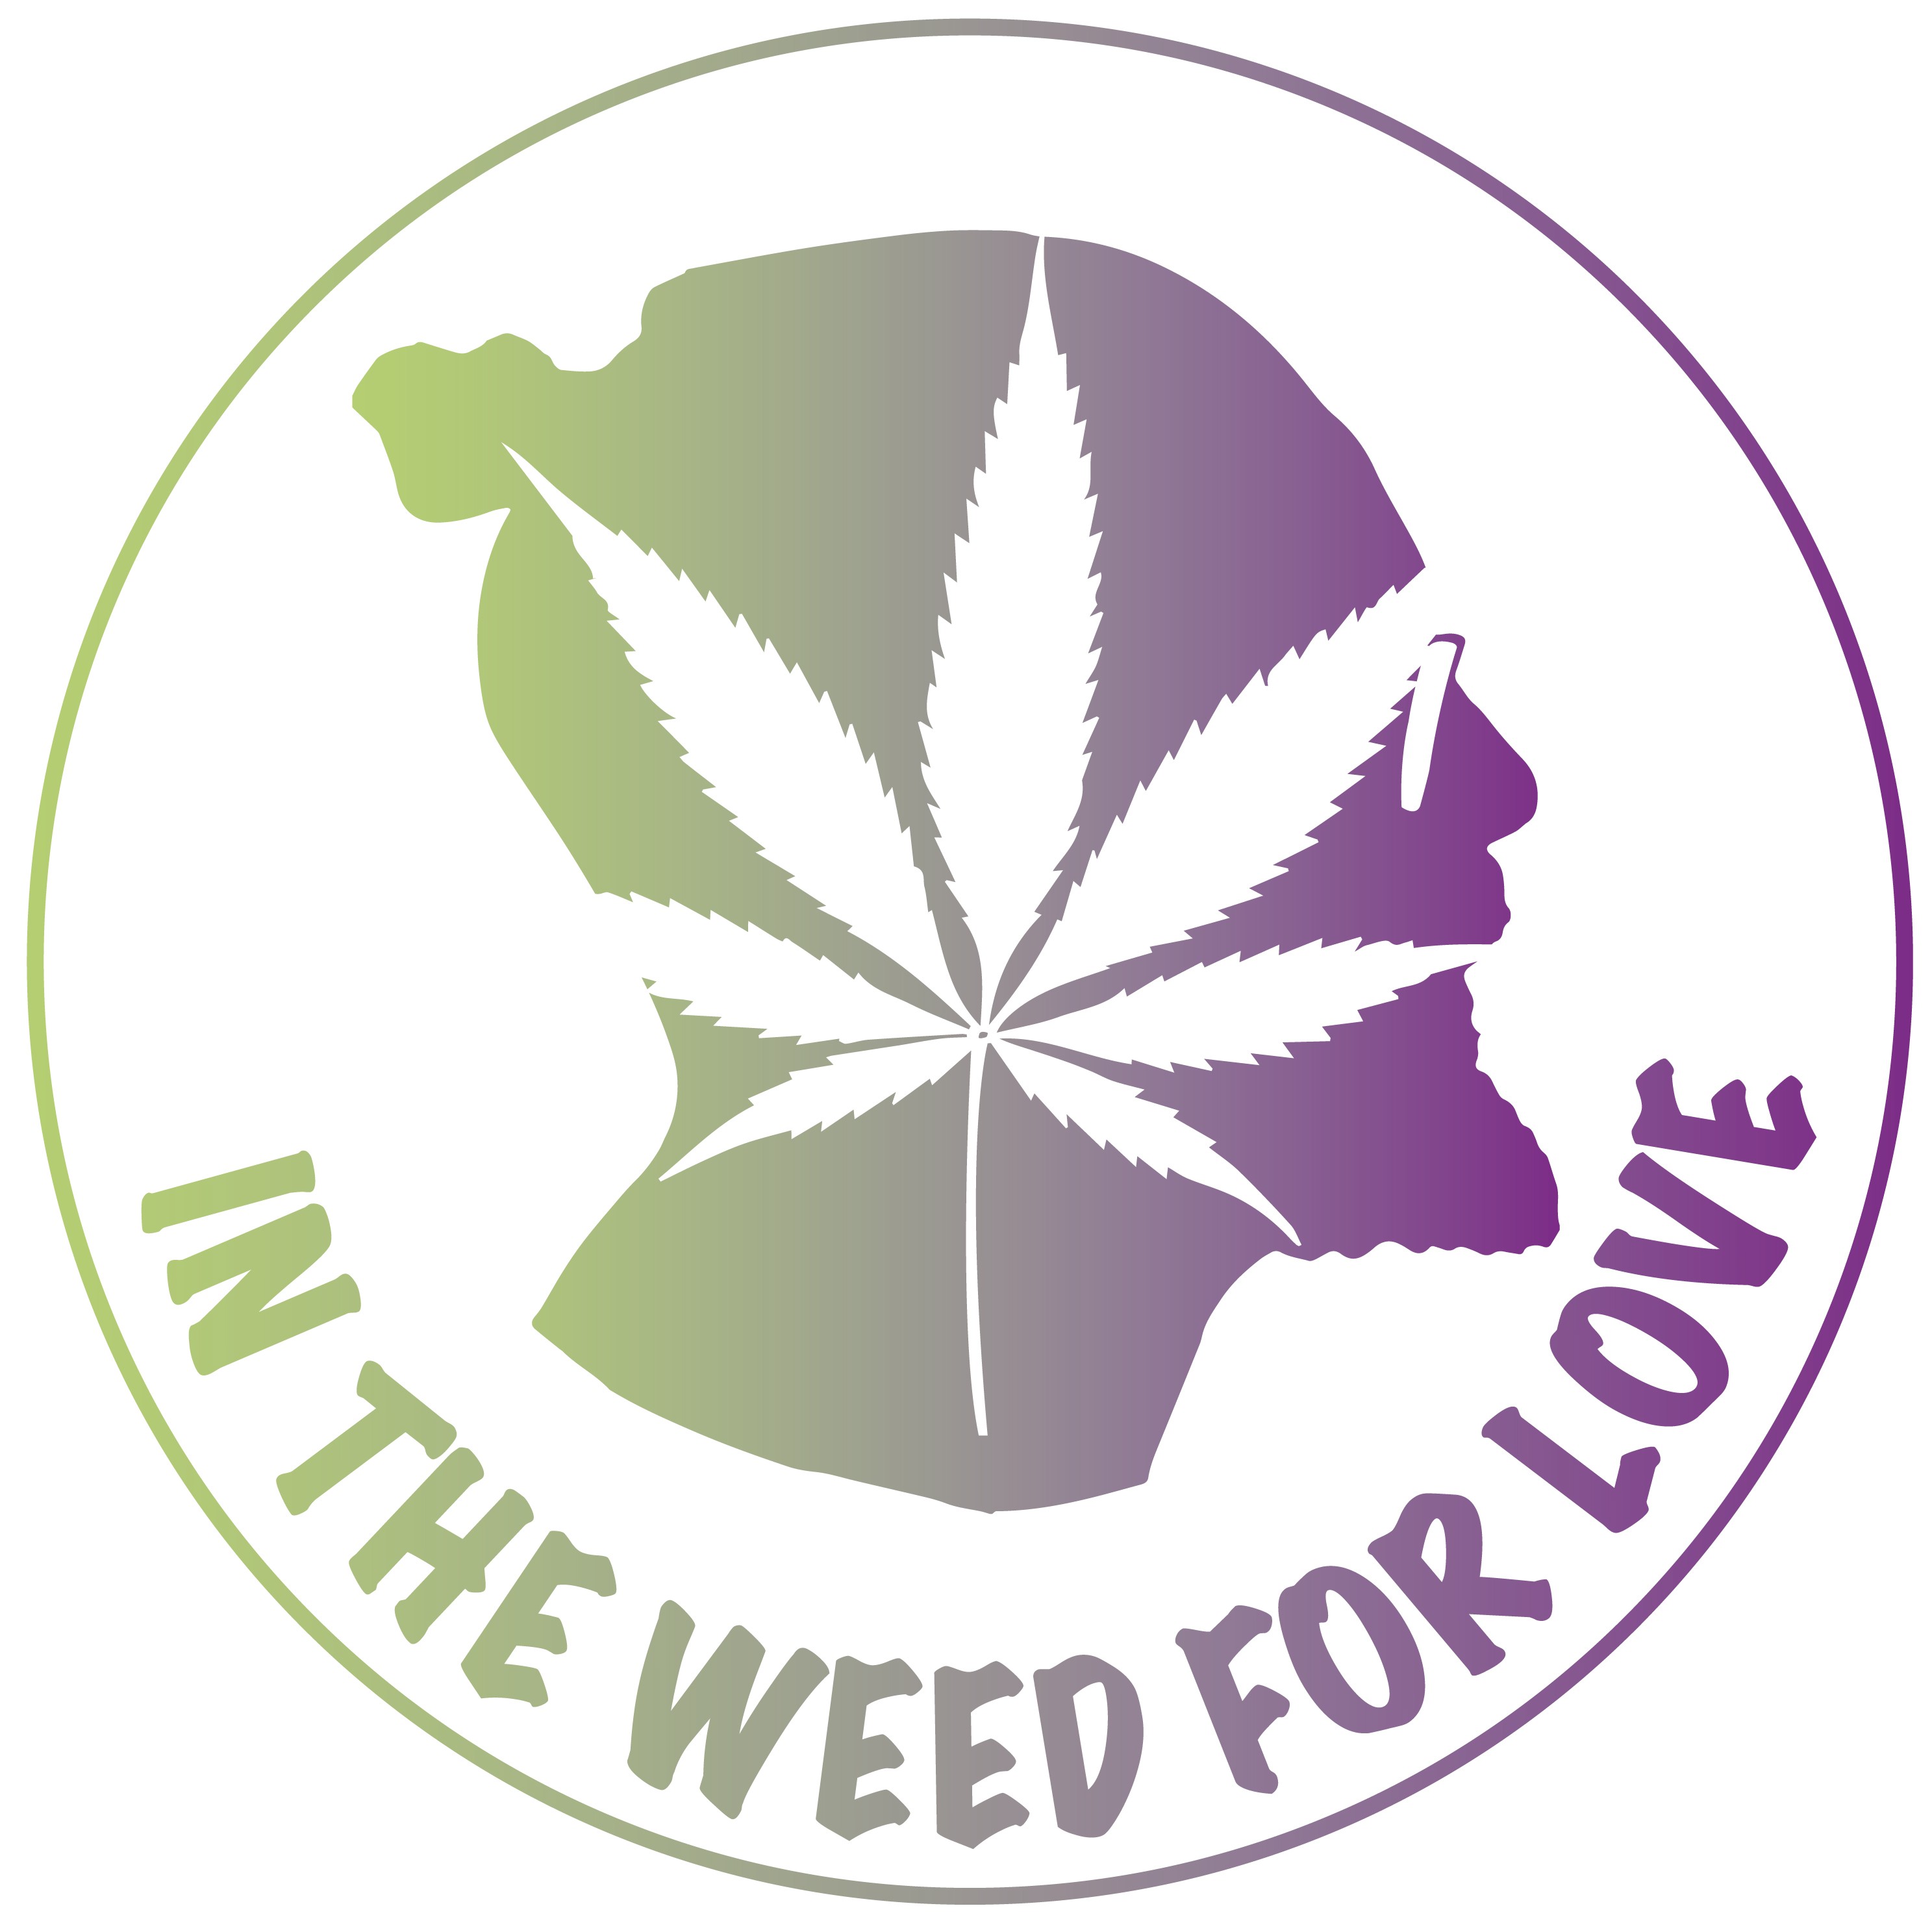 In the weed for love